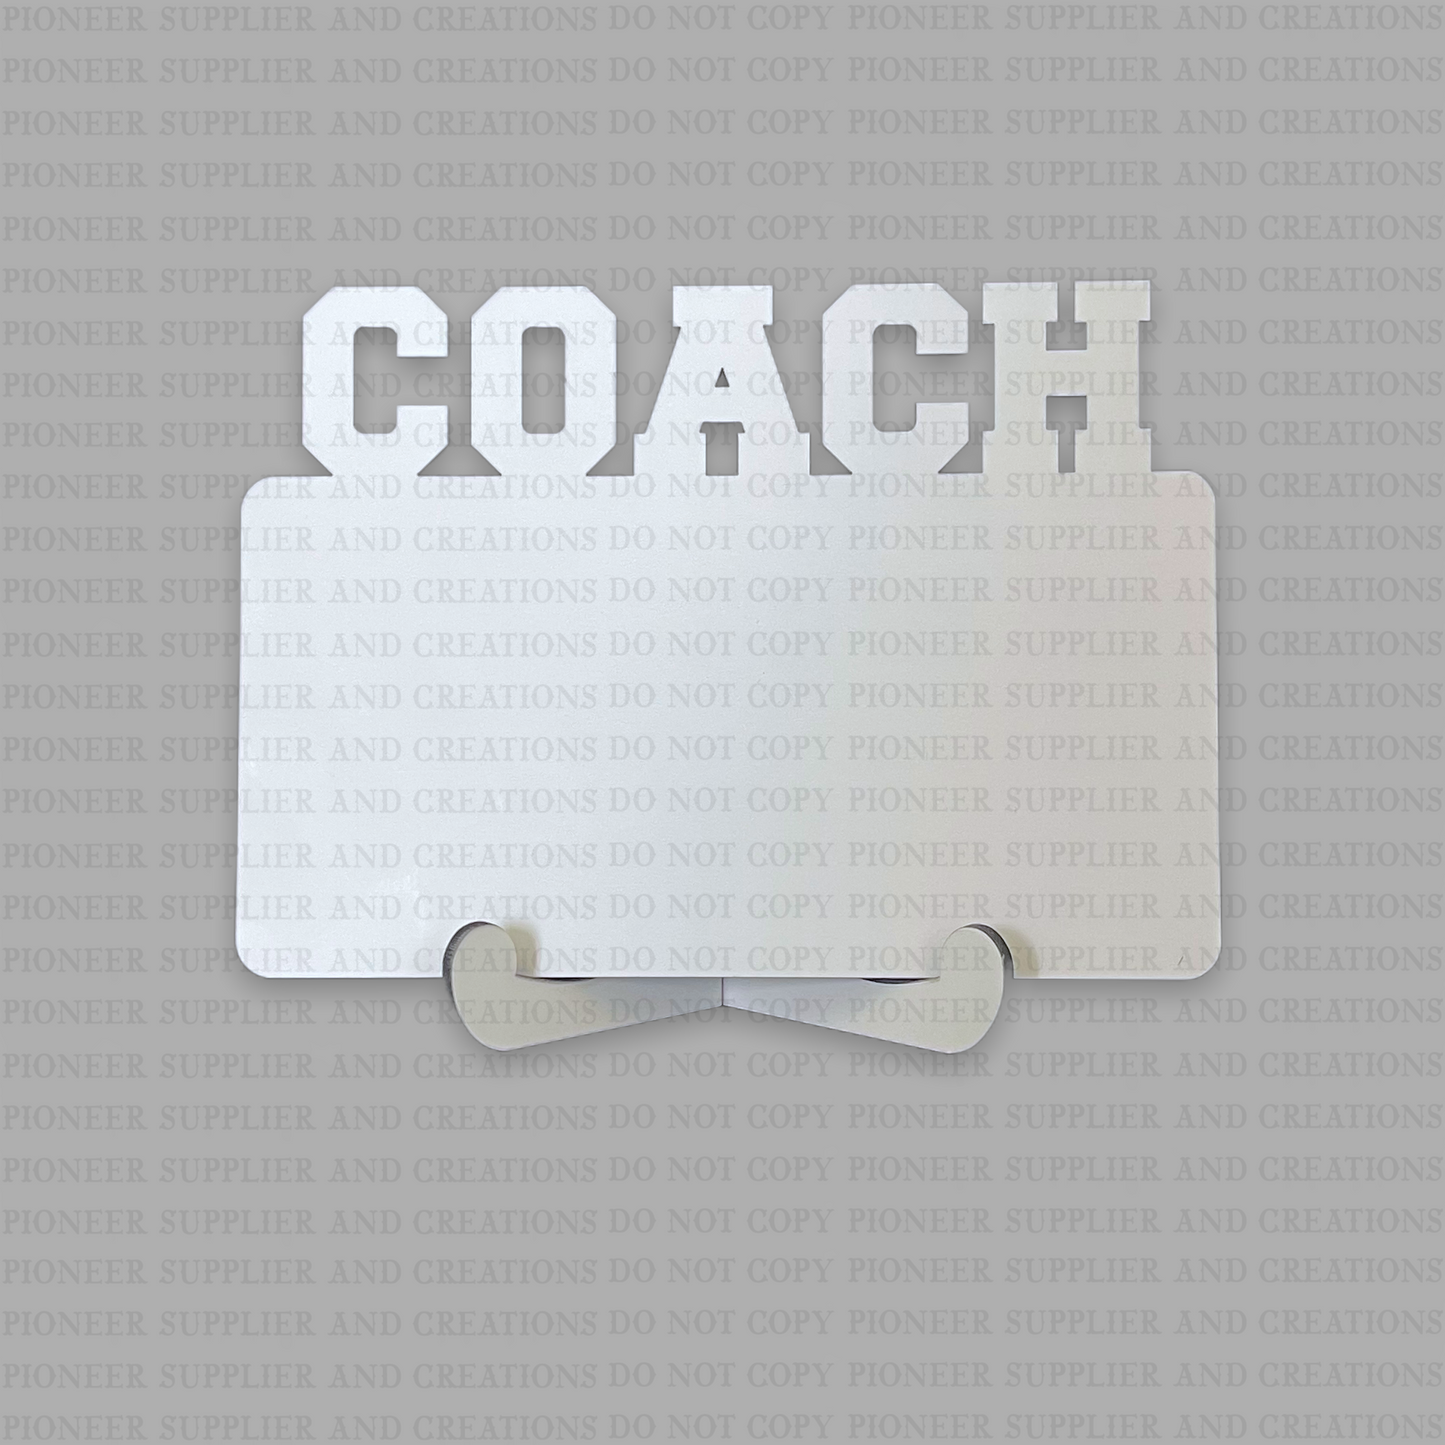 Coach Sublimation Photo Panel with Stand